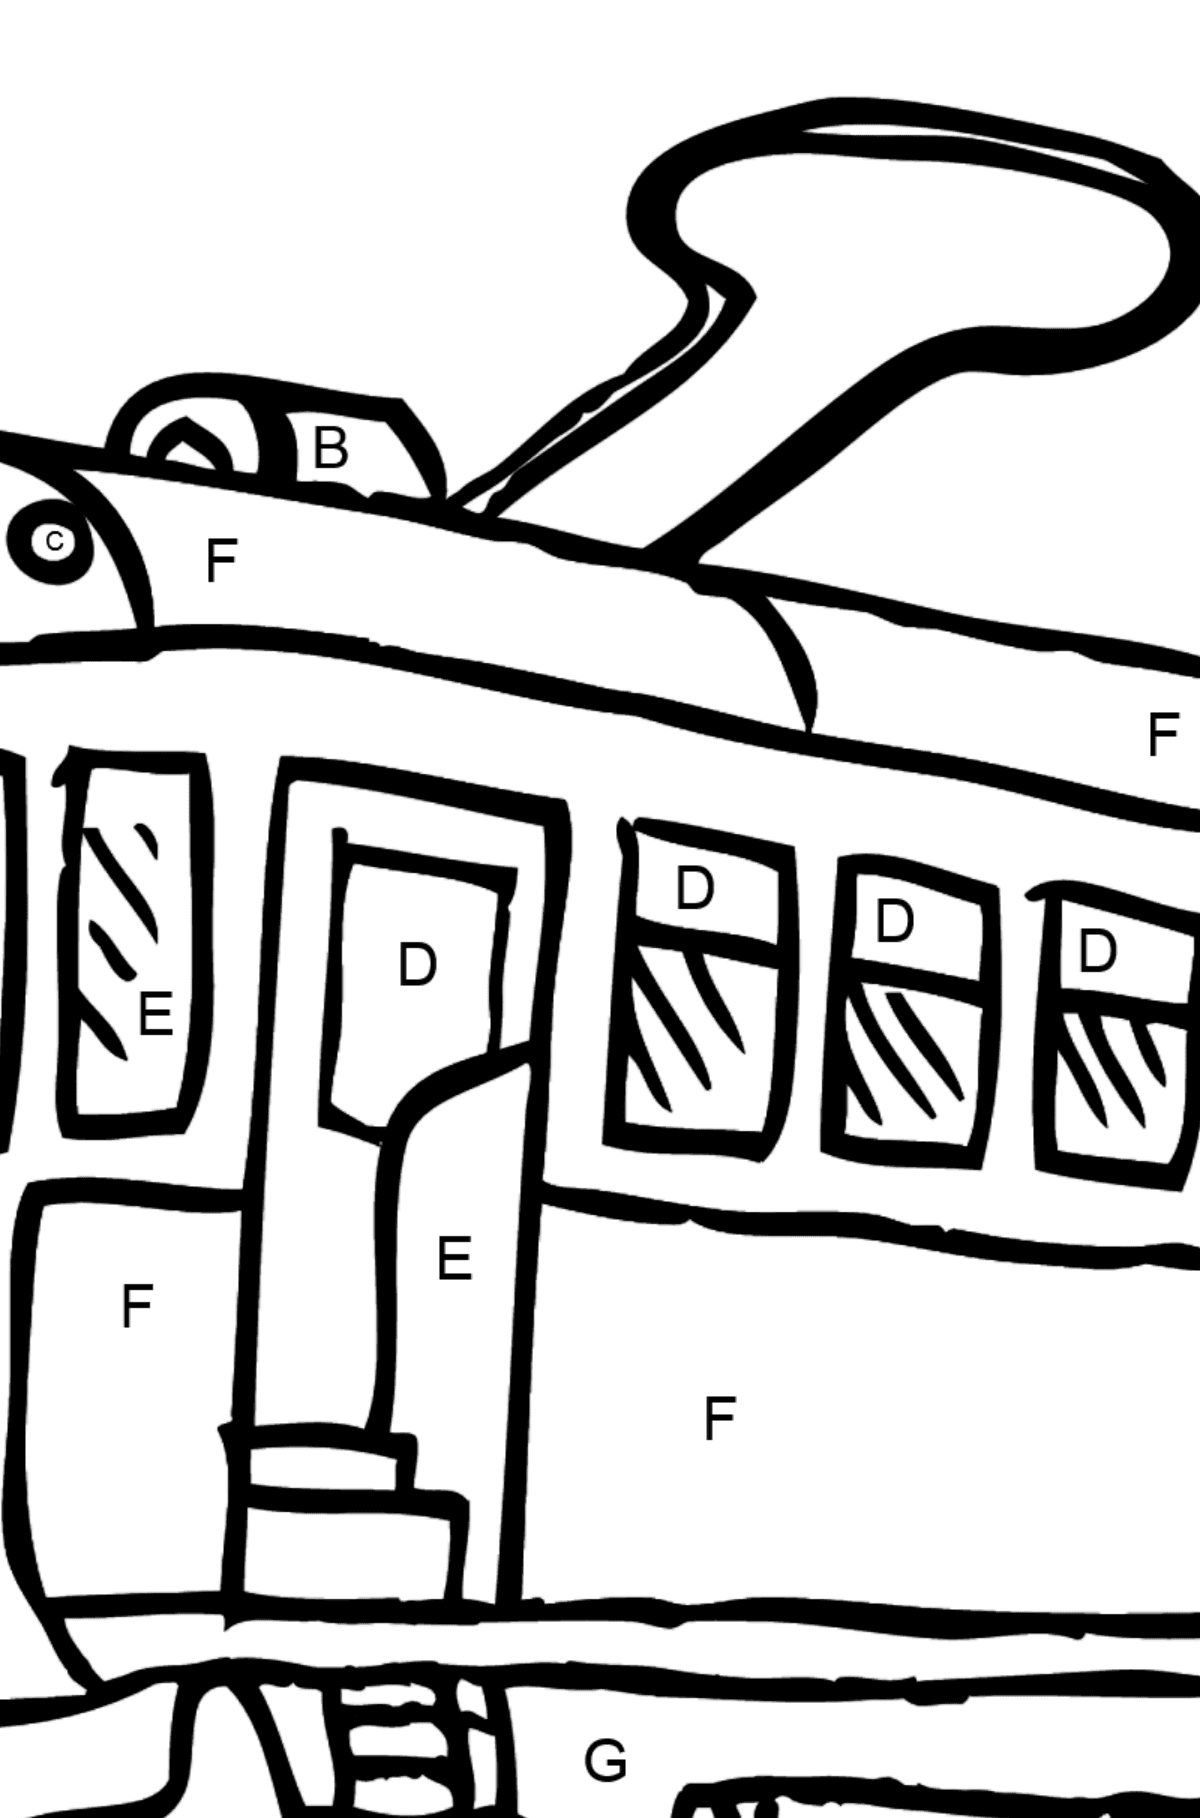 Simple Coloring Page - A Tram is Bored - Coloring by Letters for Kids